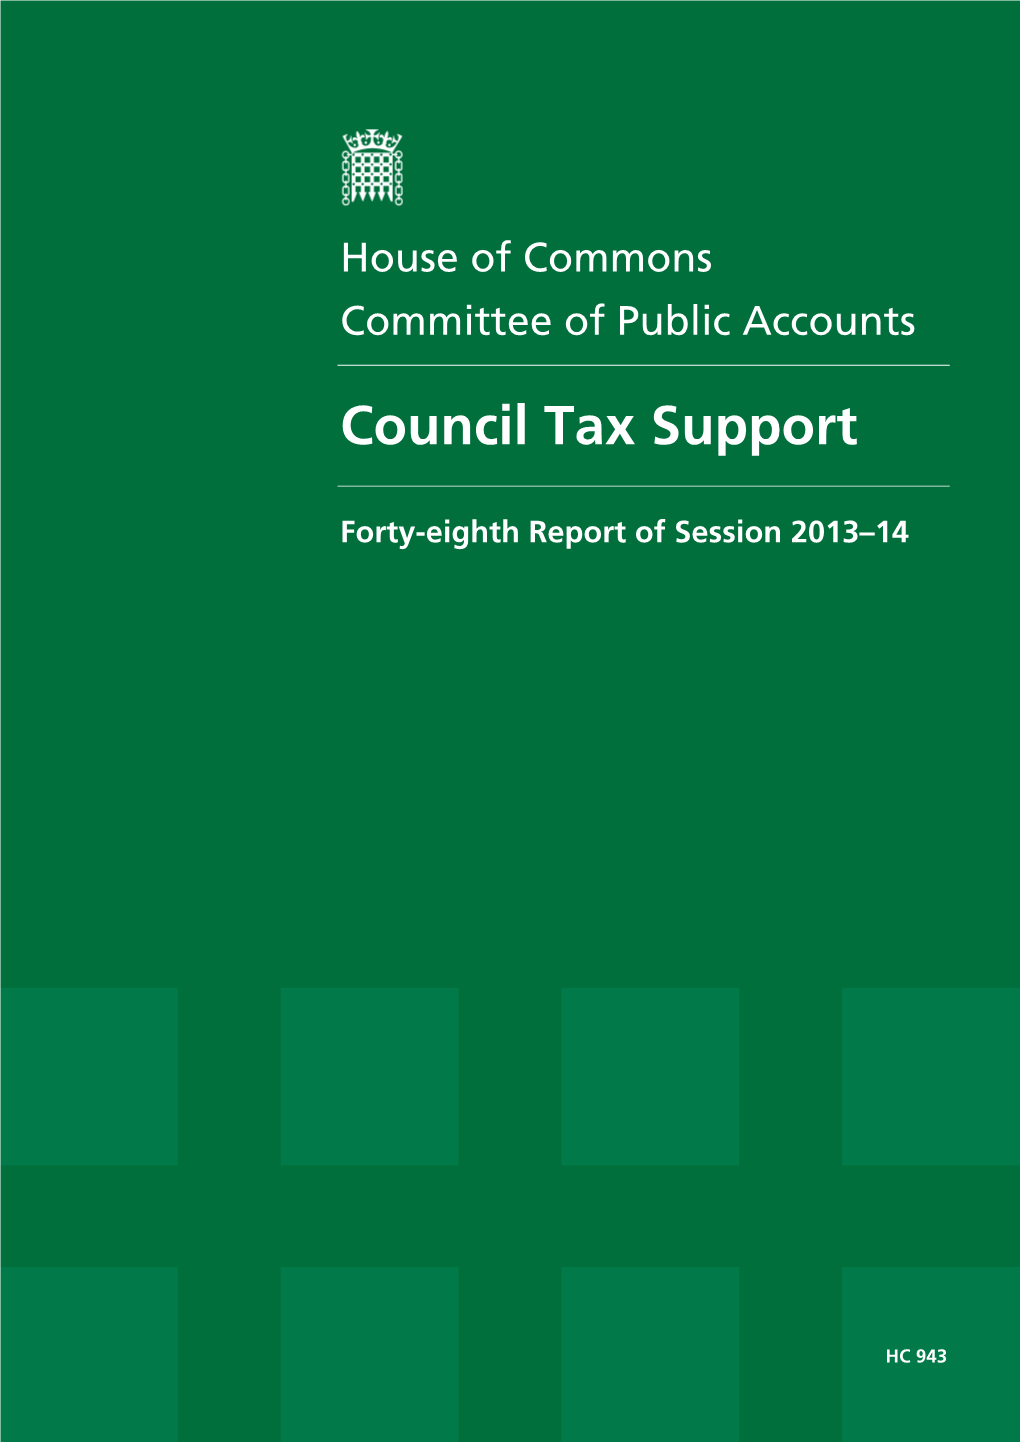 PAC Council Tax Support